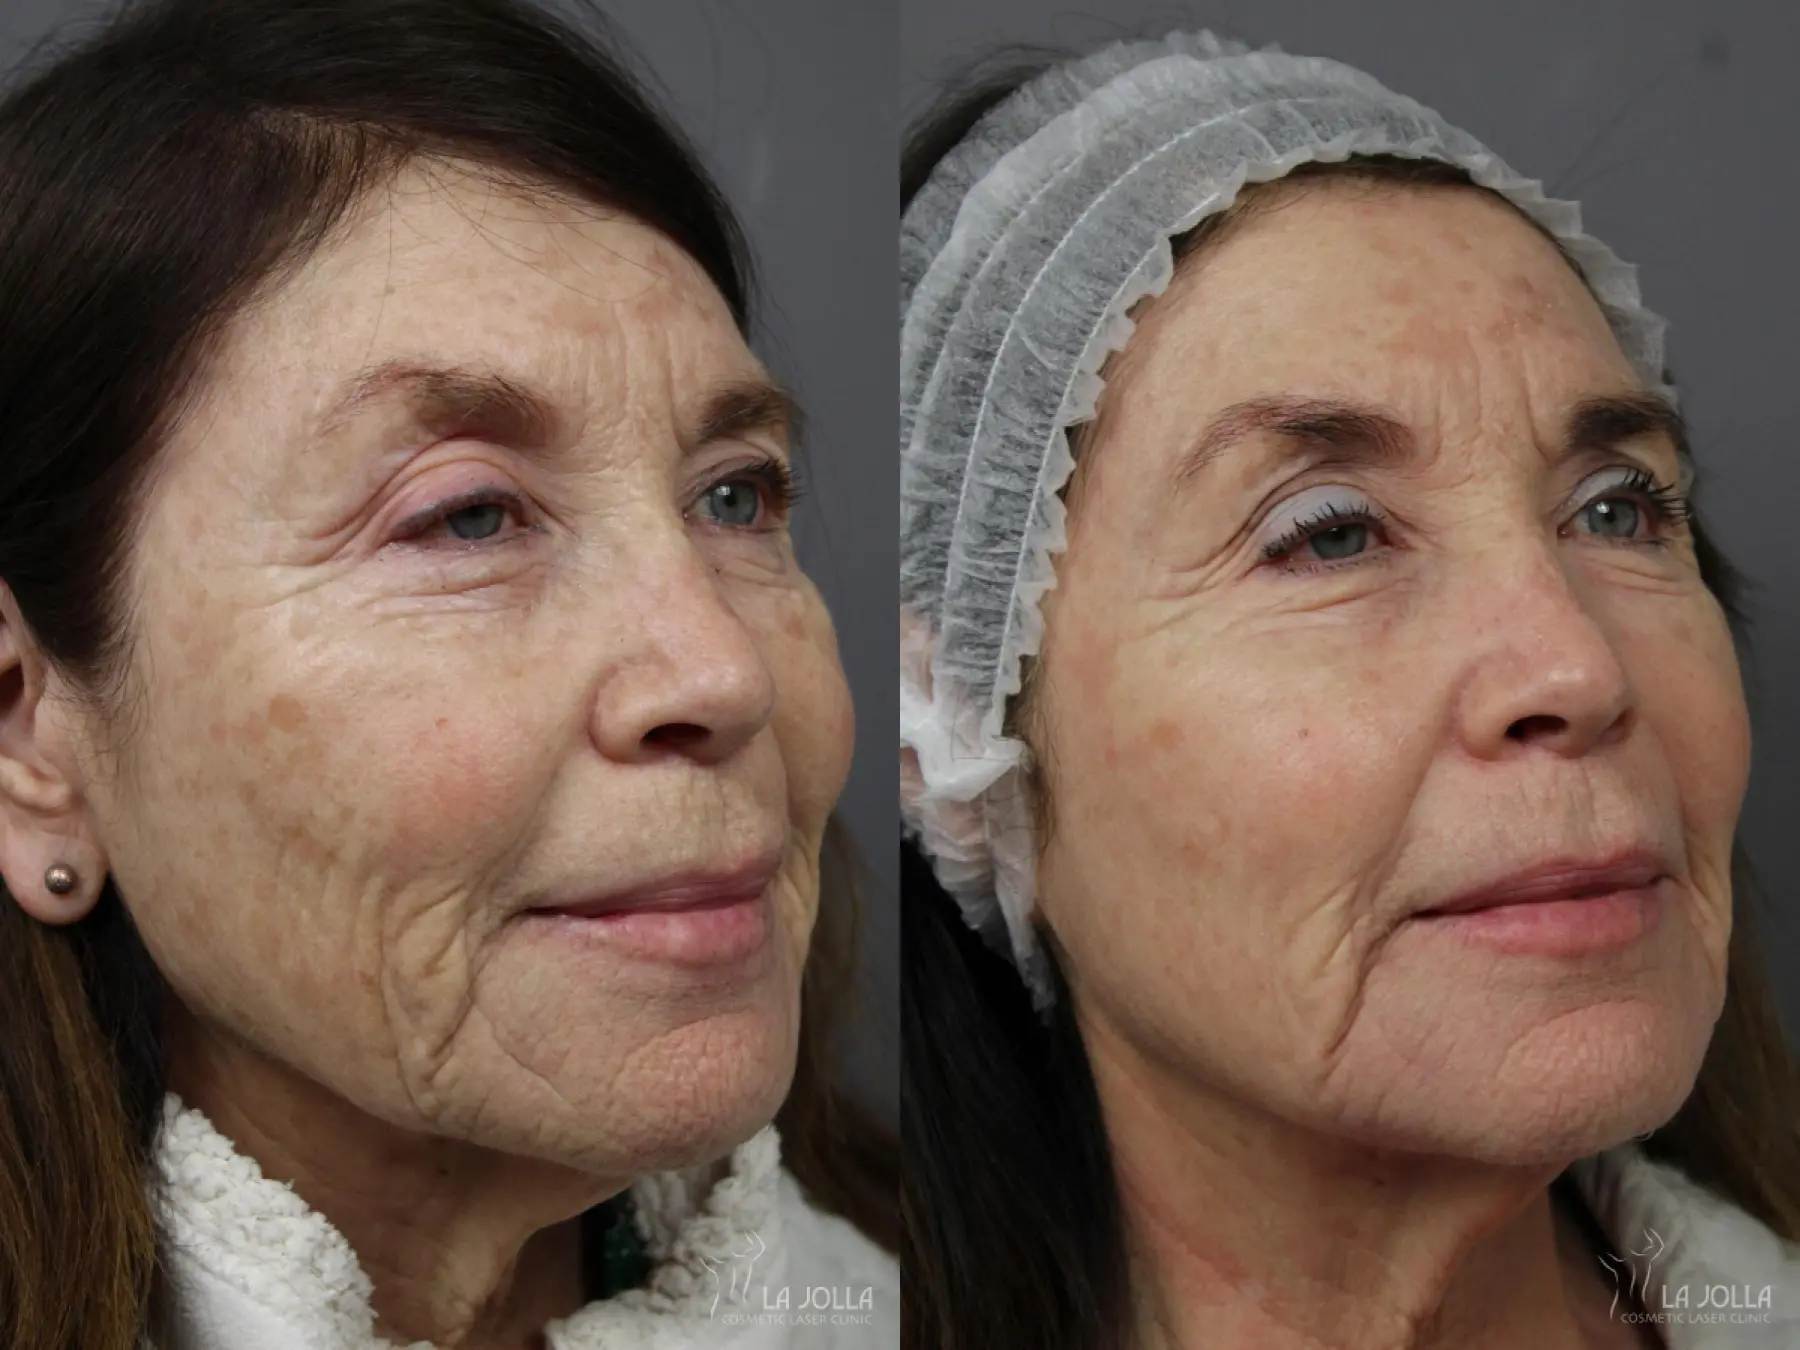 Fraxel®: Patient 1 - Before and After 2